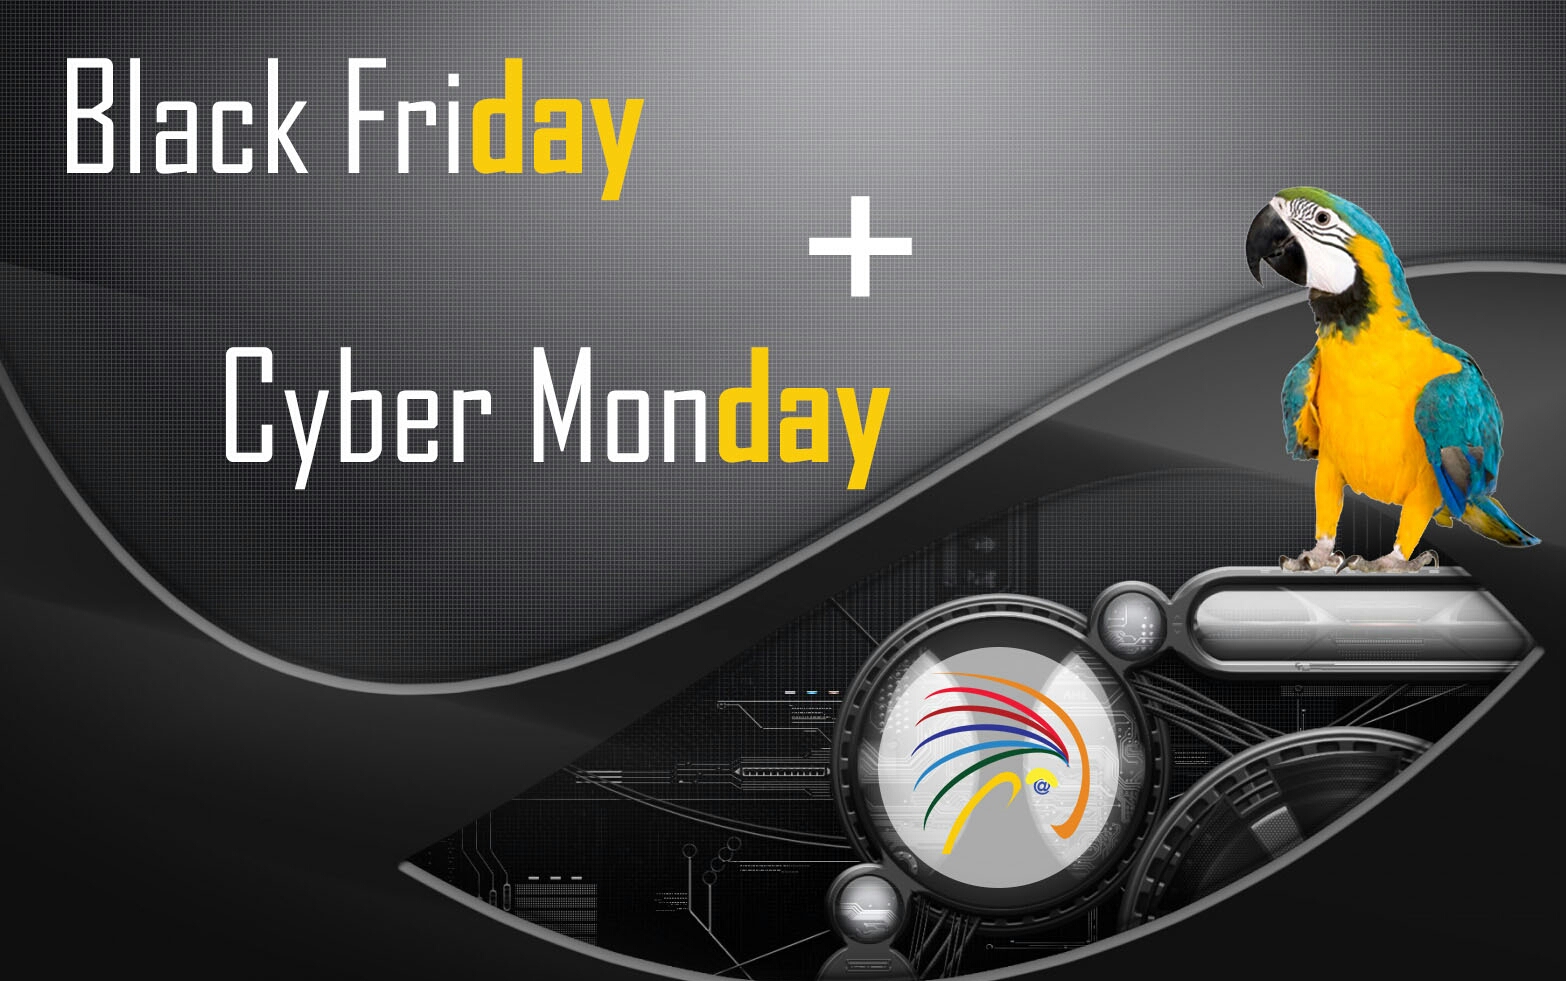 Centralino cloud: Black Friday + Cyber Monday = Special Day 2019!